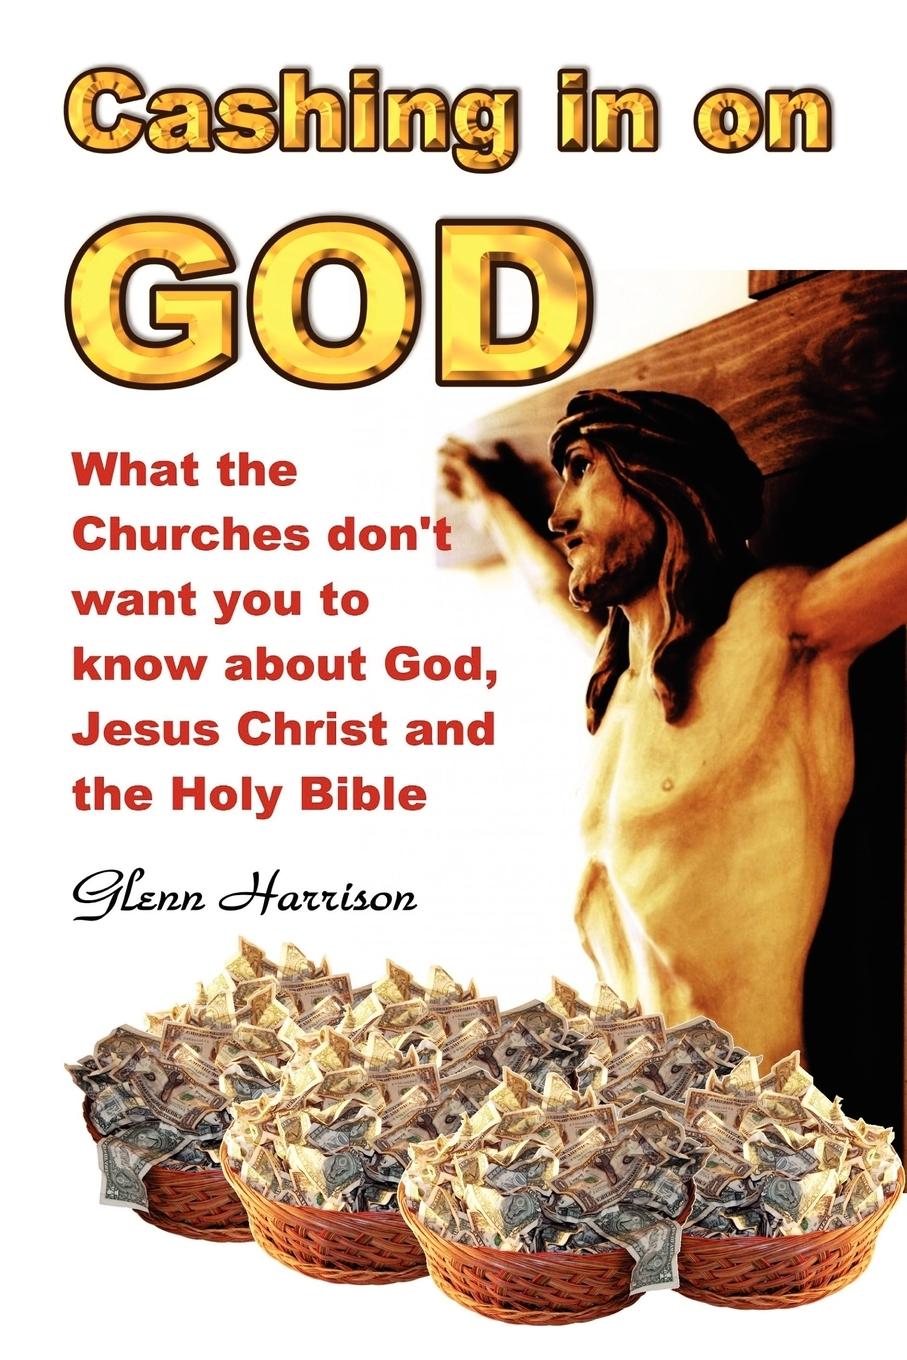 Cashing in on God... What the Churches Don t Want You to Know about God, Jesus Christ and the Holy Bible. - Harrison, Glenn